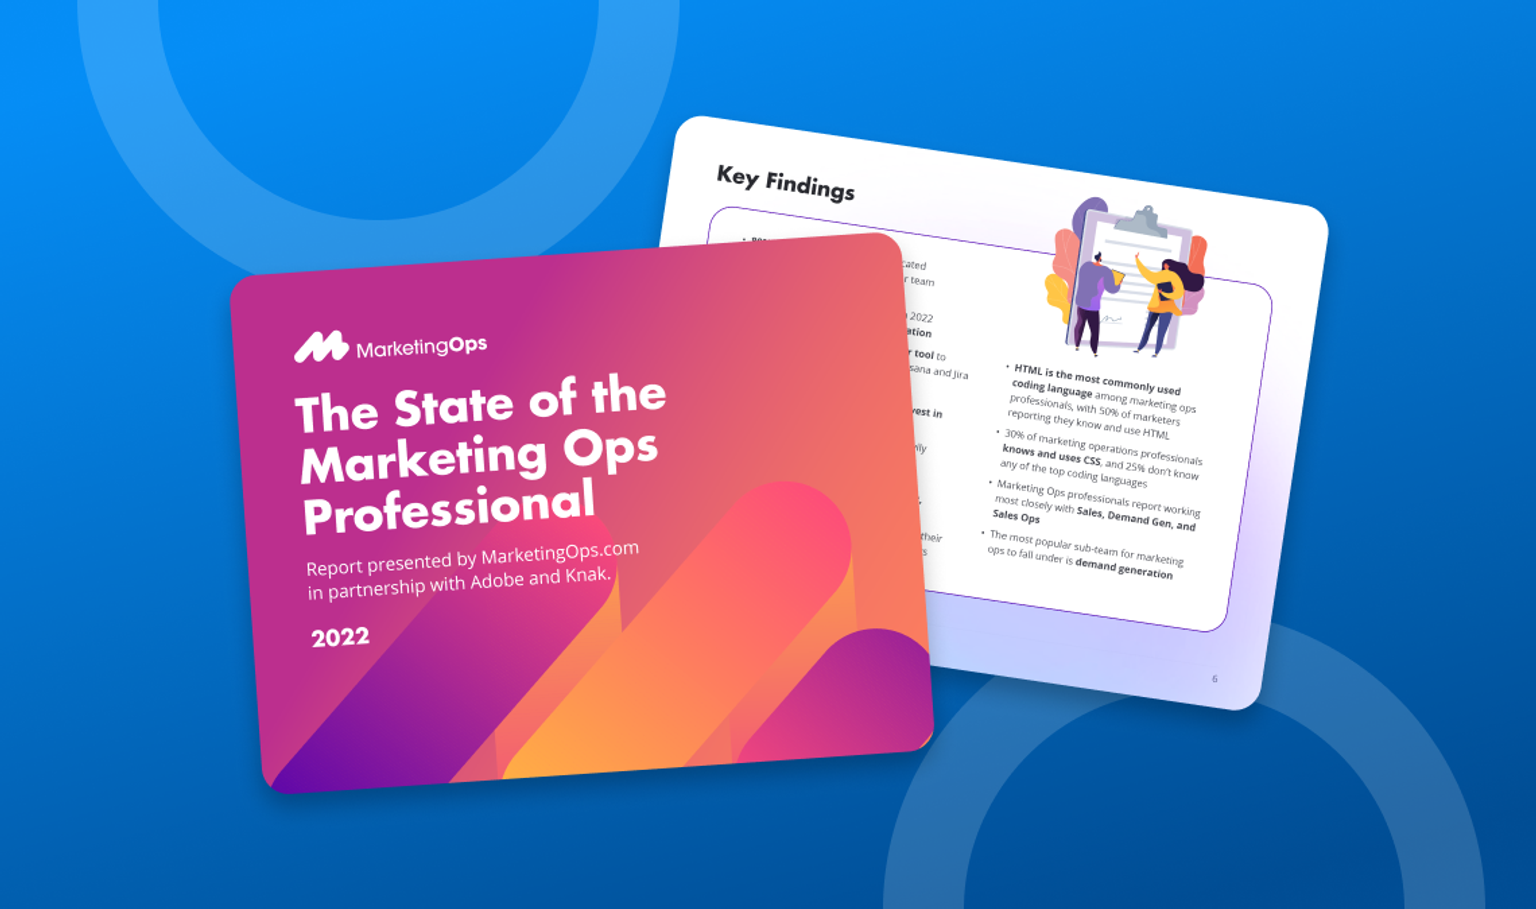 The 2022 State of the Marketing Ops Professional Report is out